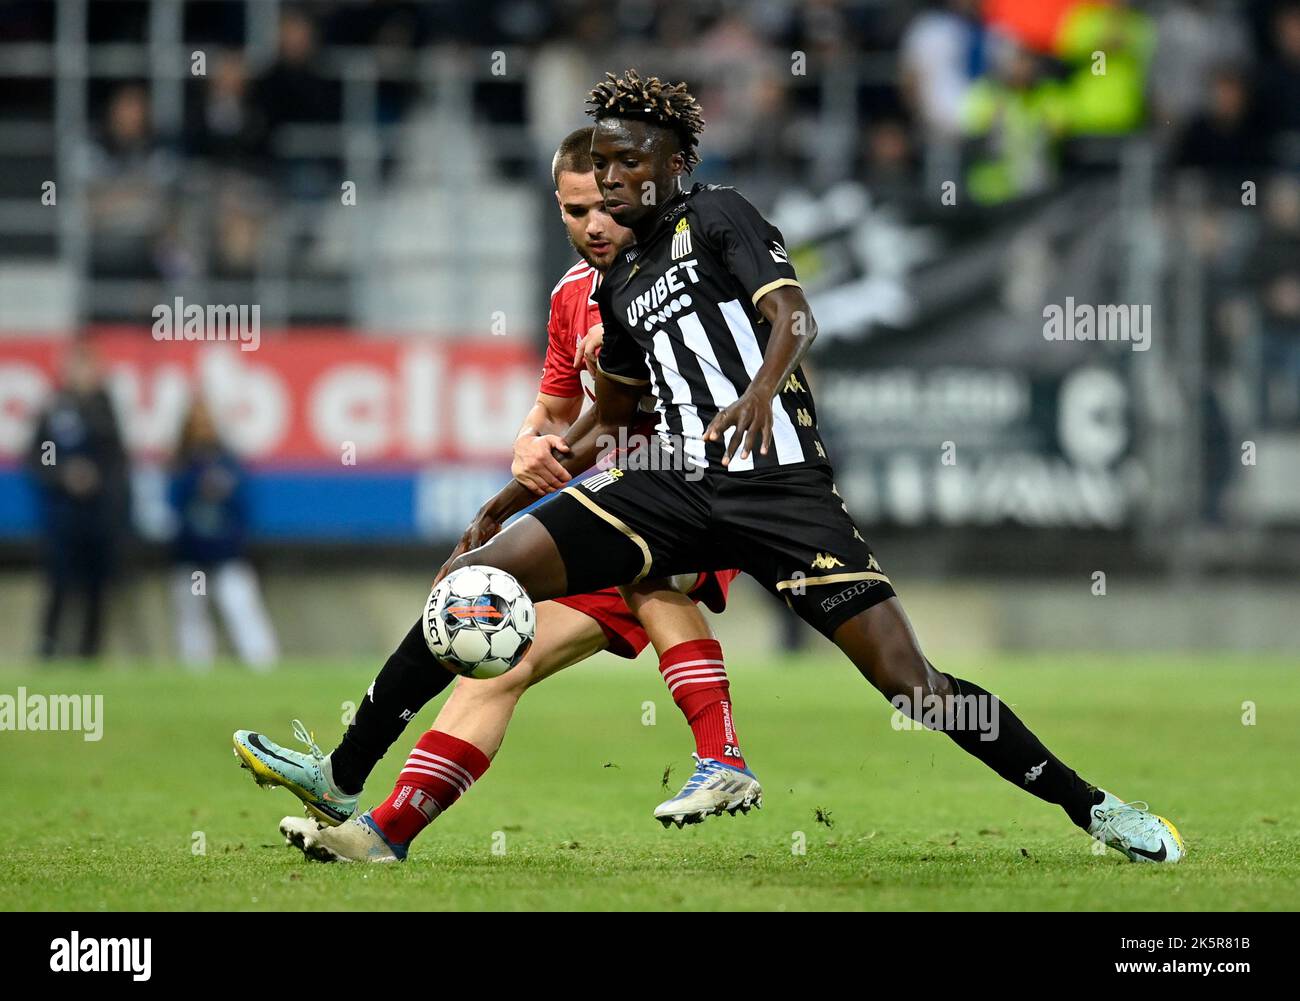 Standard's Nicolas Raskin and Charleroi's Youssouph Badji fight for the ball during a soccer match between Sporting Charleroi and Standard Liege, Sunday 09 October 2022 in Charleroi, on day 11 of the 2022-2023 'Jupiler Pro League' first division of the Belgian championship. BELGA PHOTO JOHN THYS Stock Photo